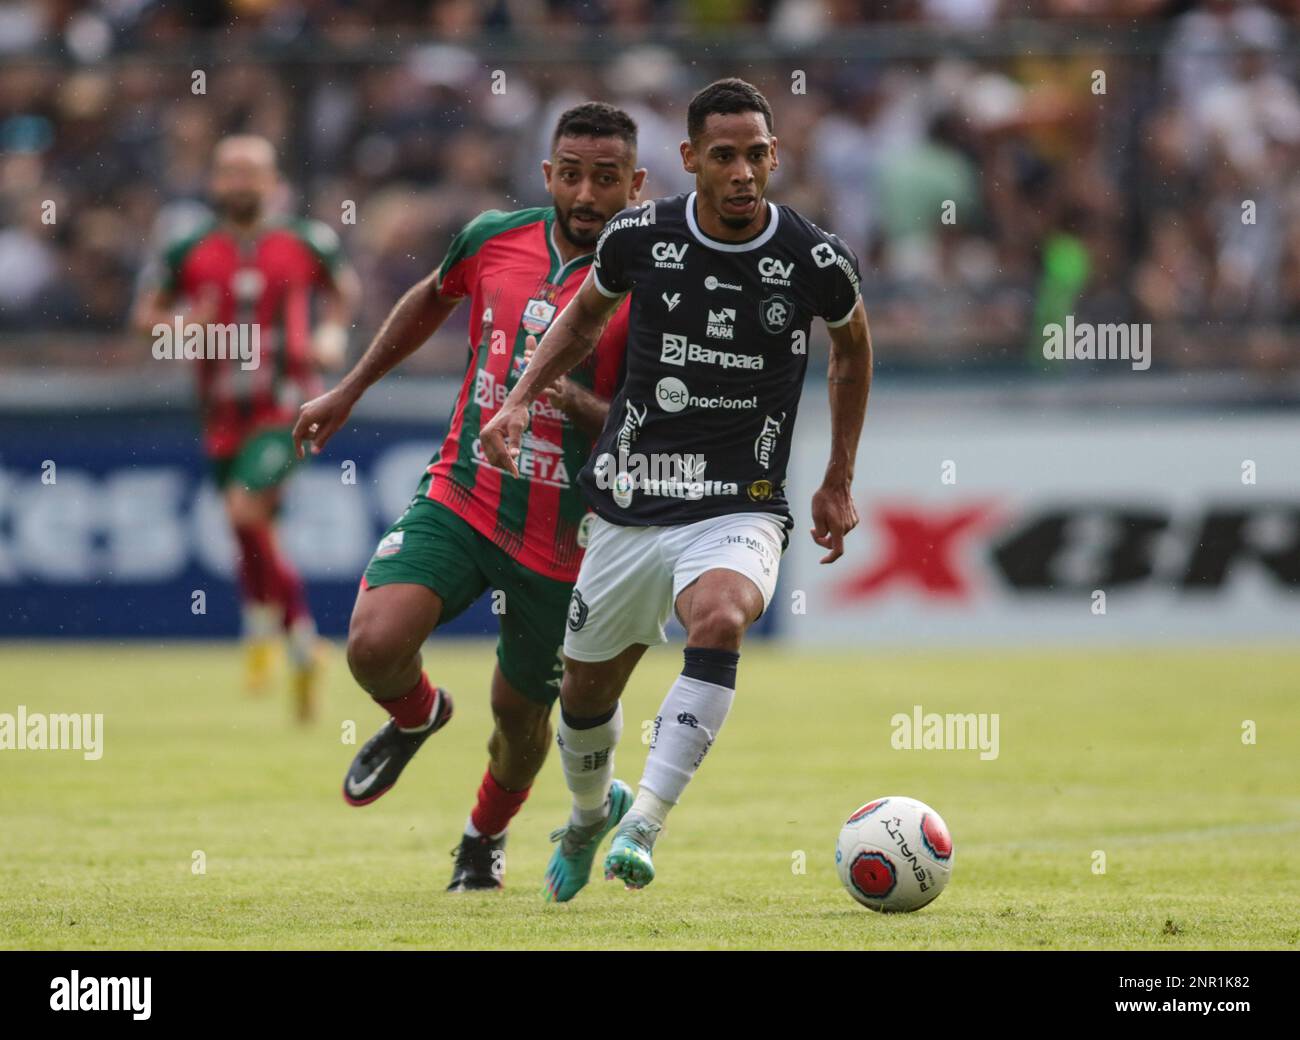 Belem, Brazil. 26th Feb, 2023. PA - Belem - 02/26/2023 - PARAENSE 2023, REMO X CAMETA - Pedro Vitor player of Remo during a match against Cameta at Baenao stadium for the Paraense 2023 championship. Photo: Fernando Torres/AGIF/Sipa USA Credit: Sipa USA/Alamy Live News Stock Photo